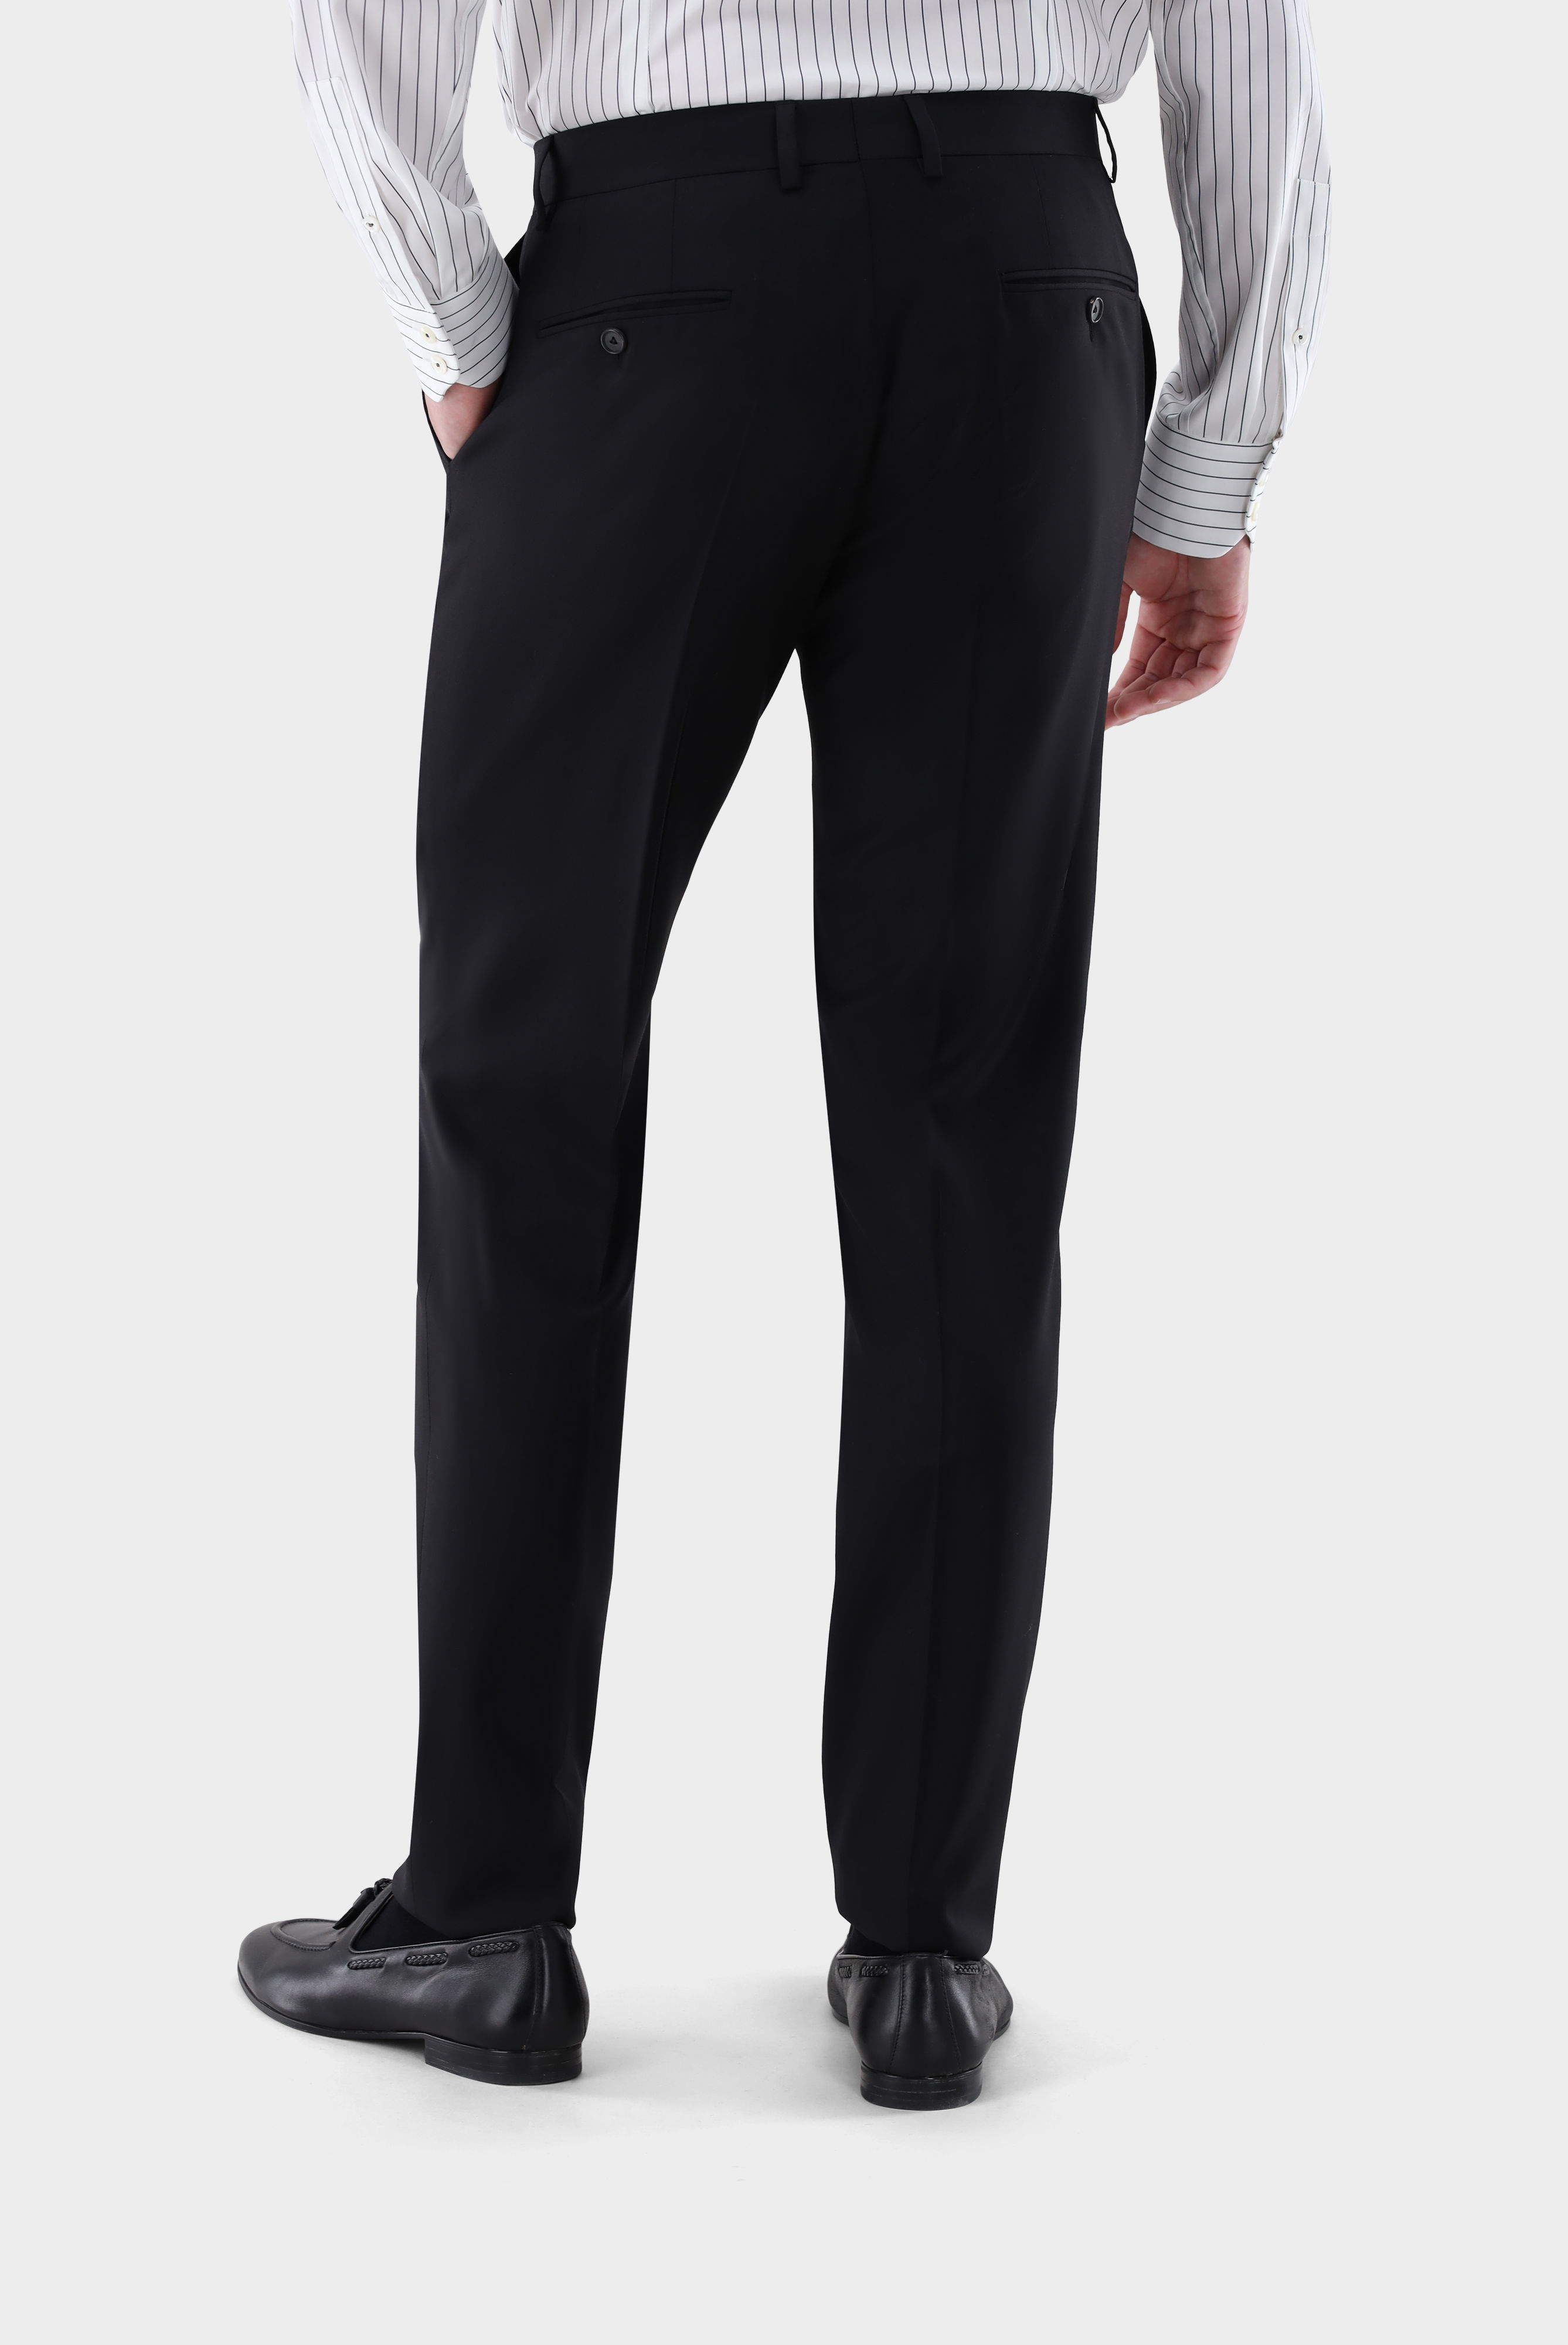 Jeans & Trousers+Wool Trousers Slim Fit+20.7880.16.H01010.099.23